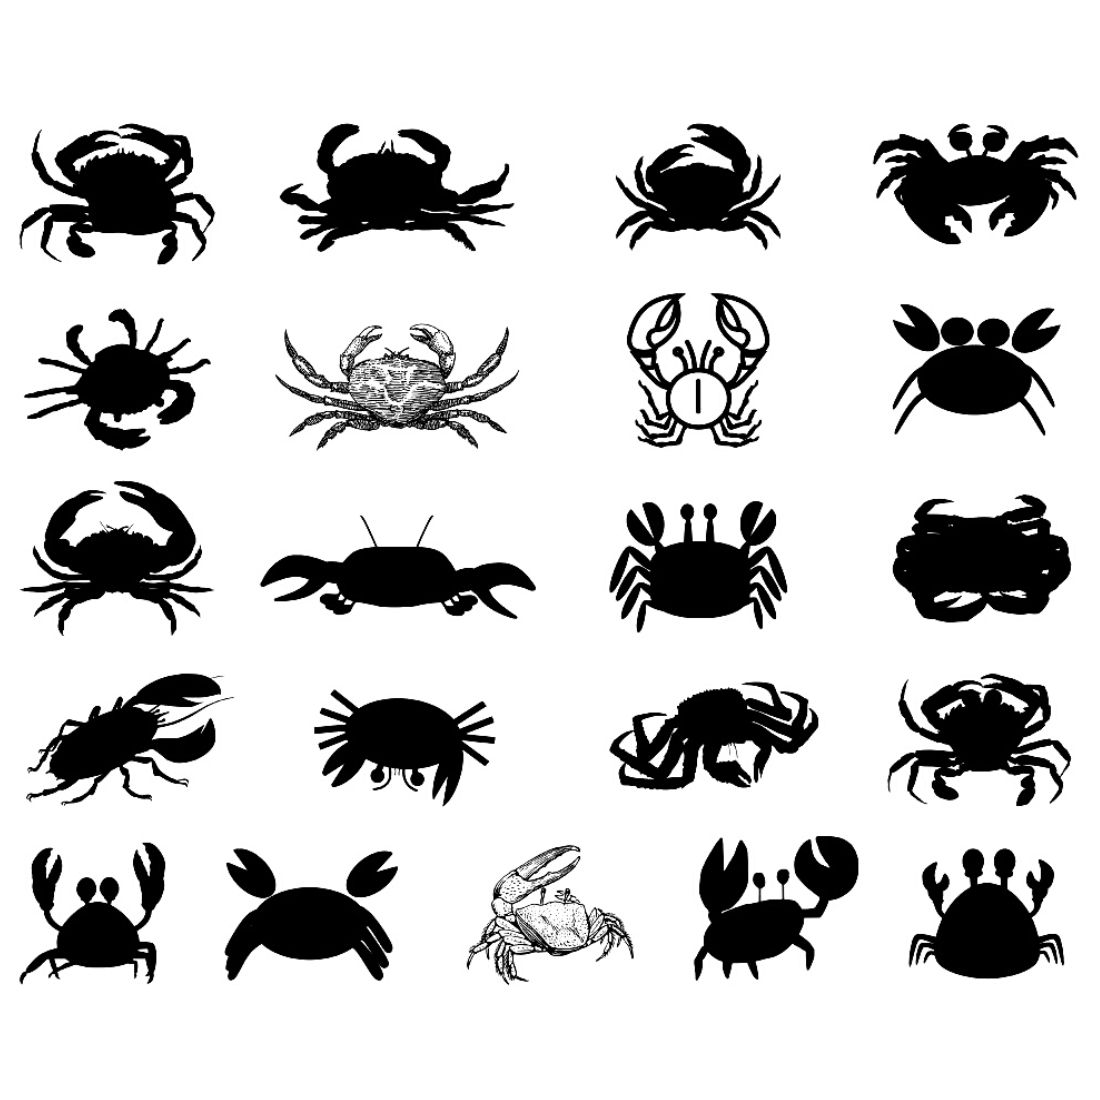 Crab Silhouette Bundles cover image.